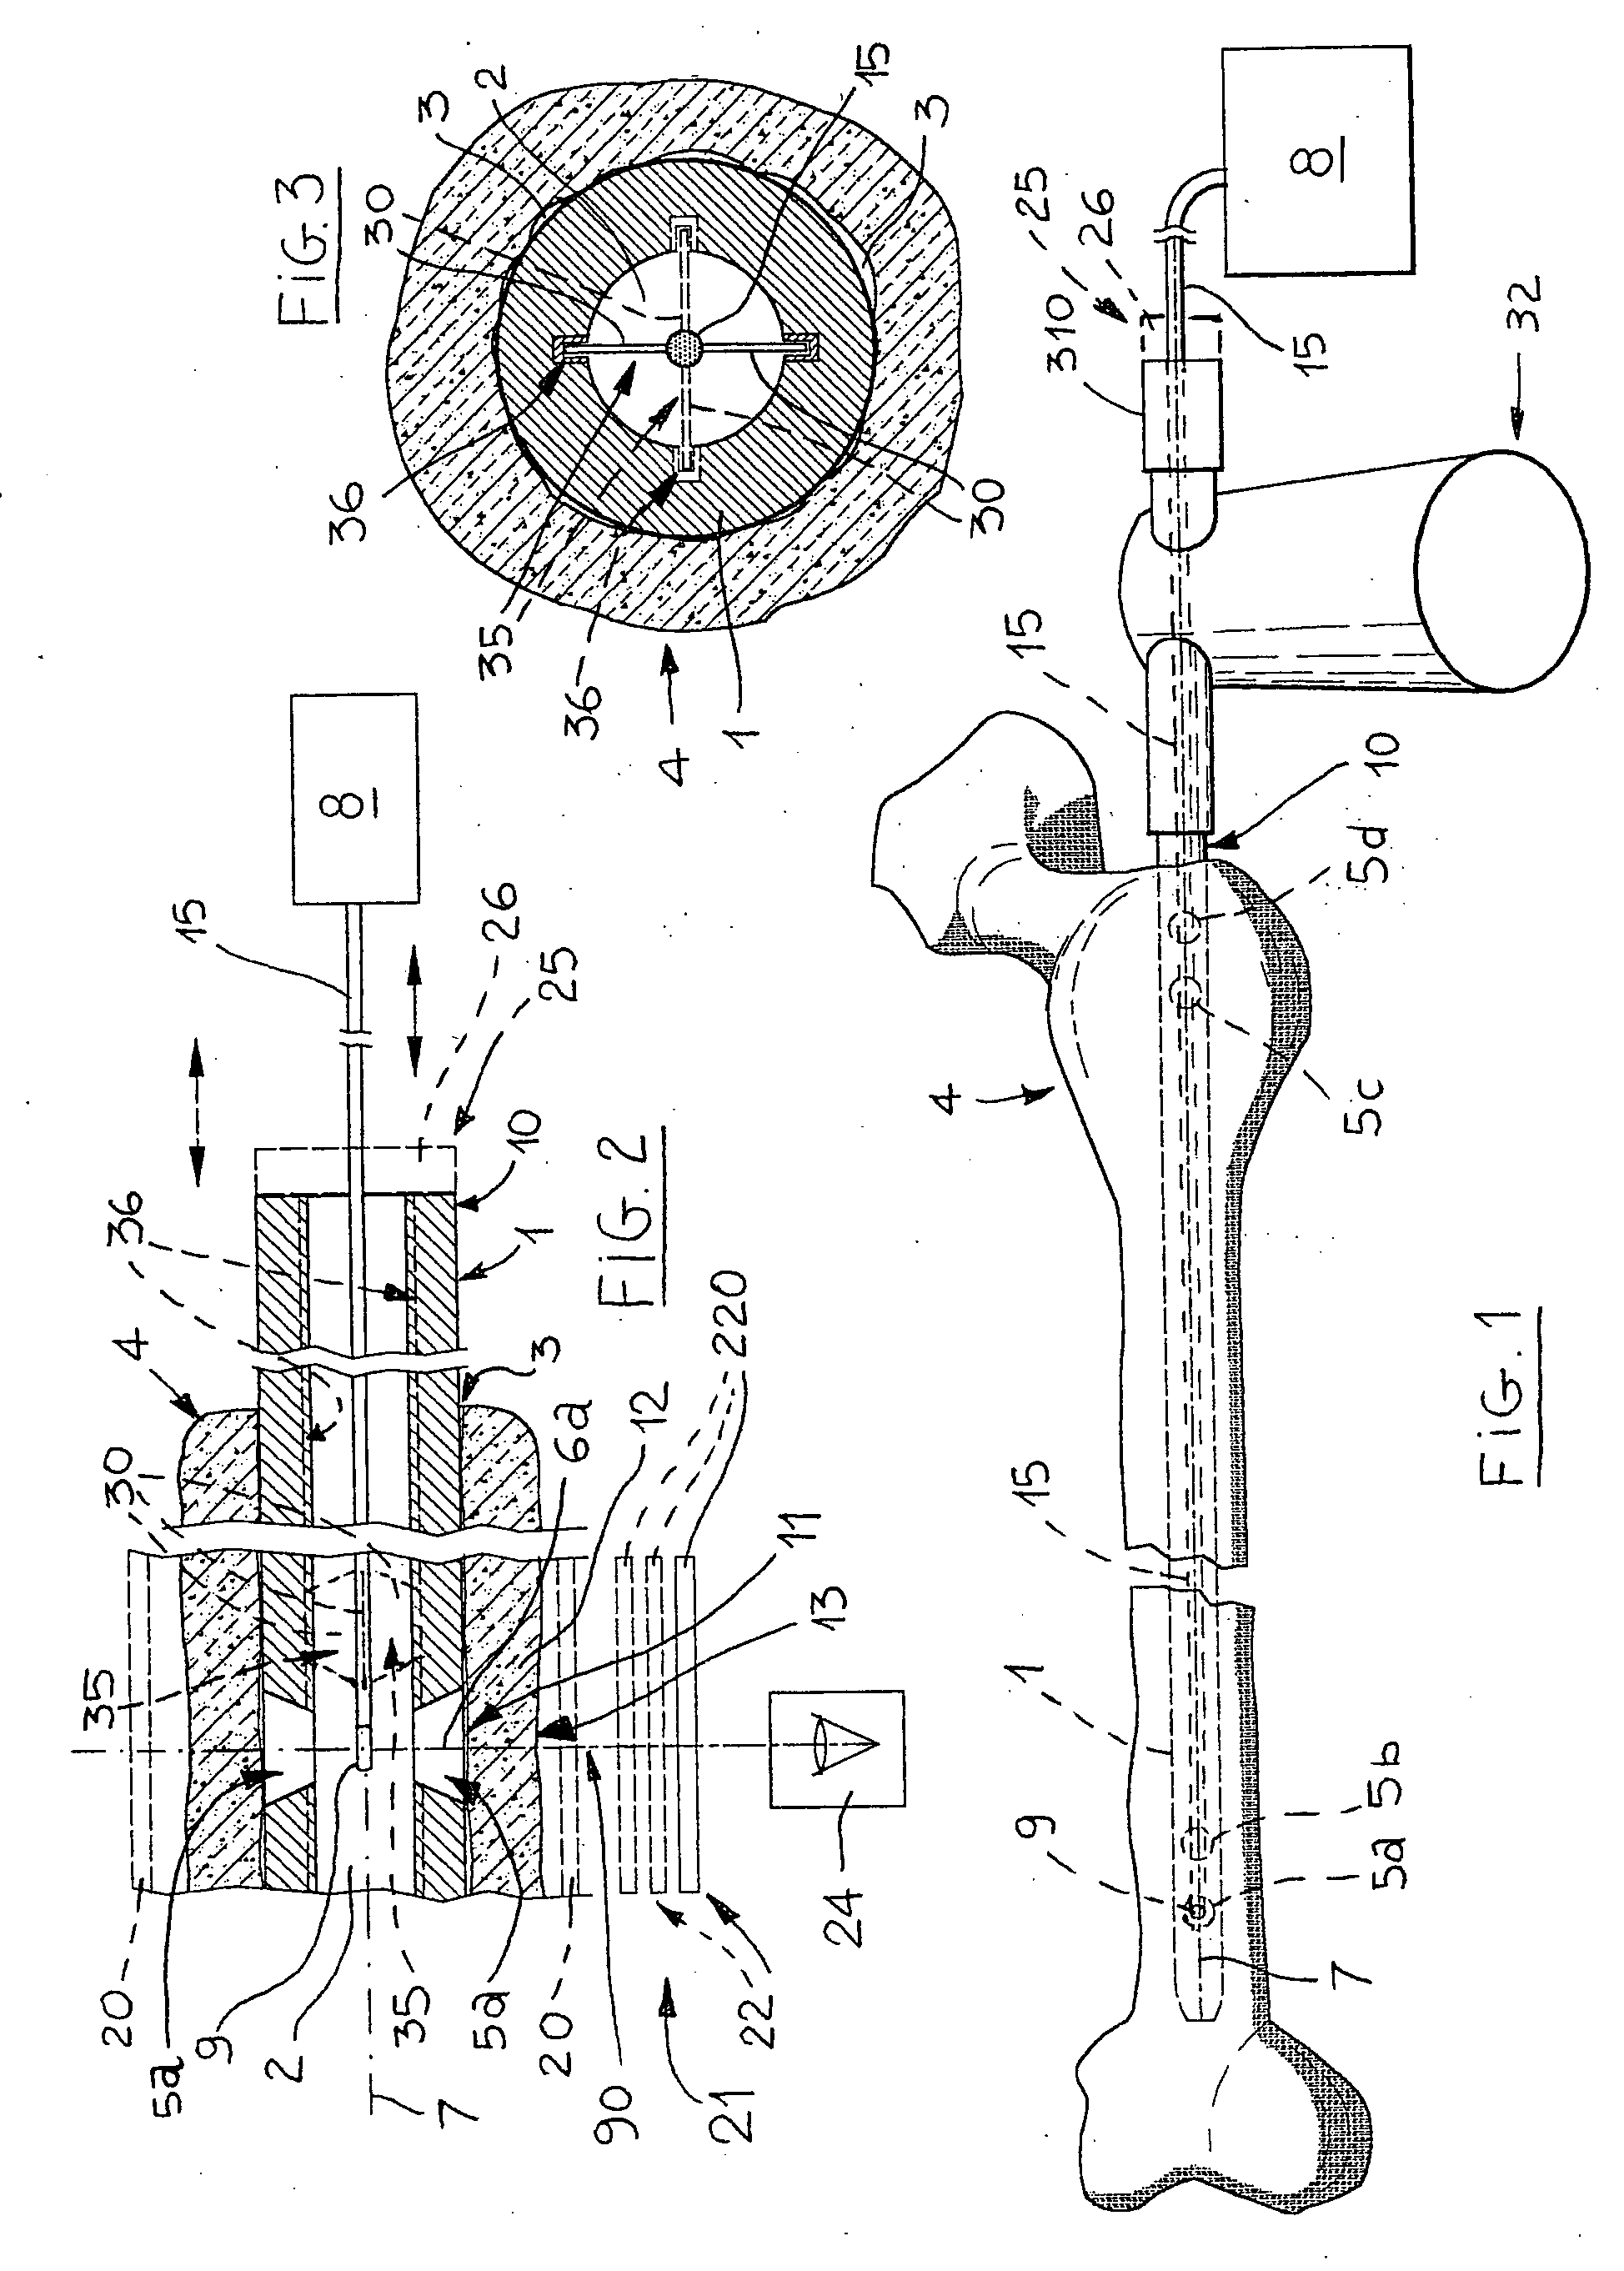 Apparatus for the osteosynthesis of bone fractures by means of locked endomedullary nailing